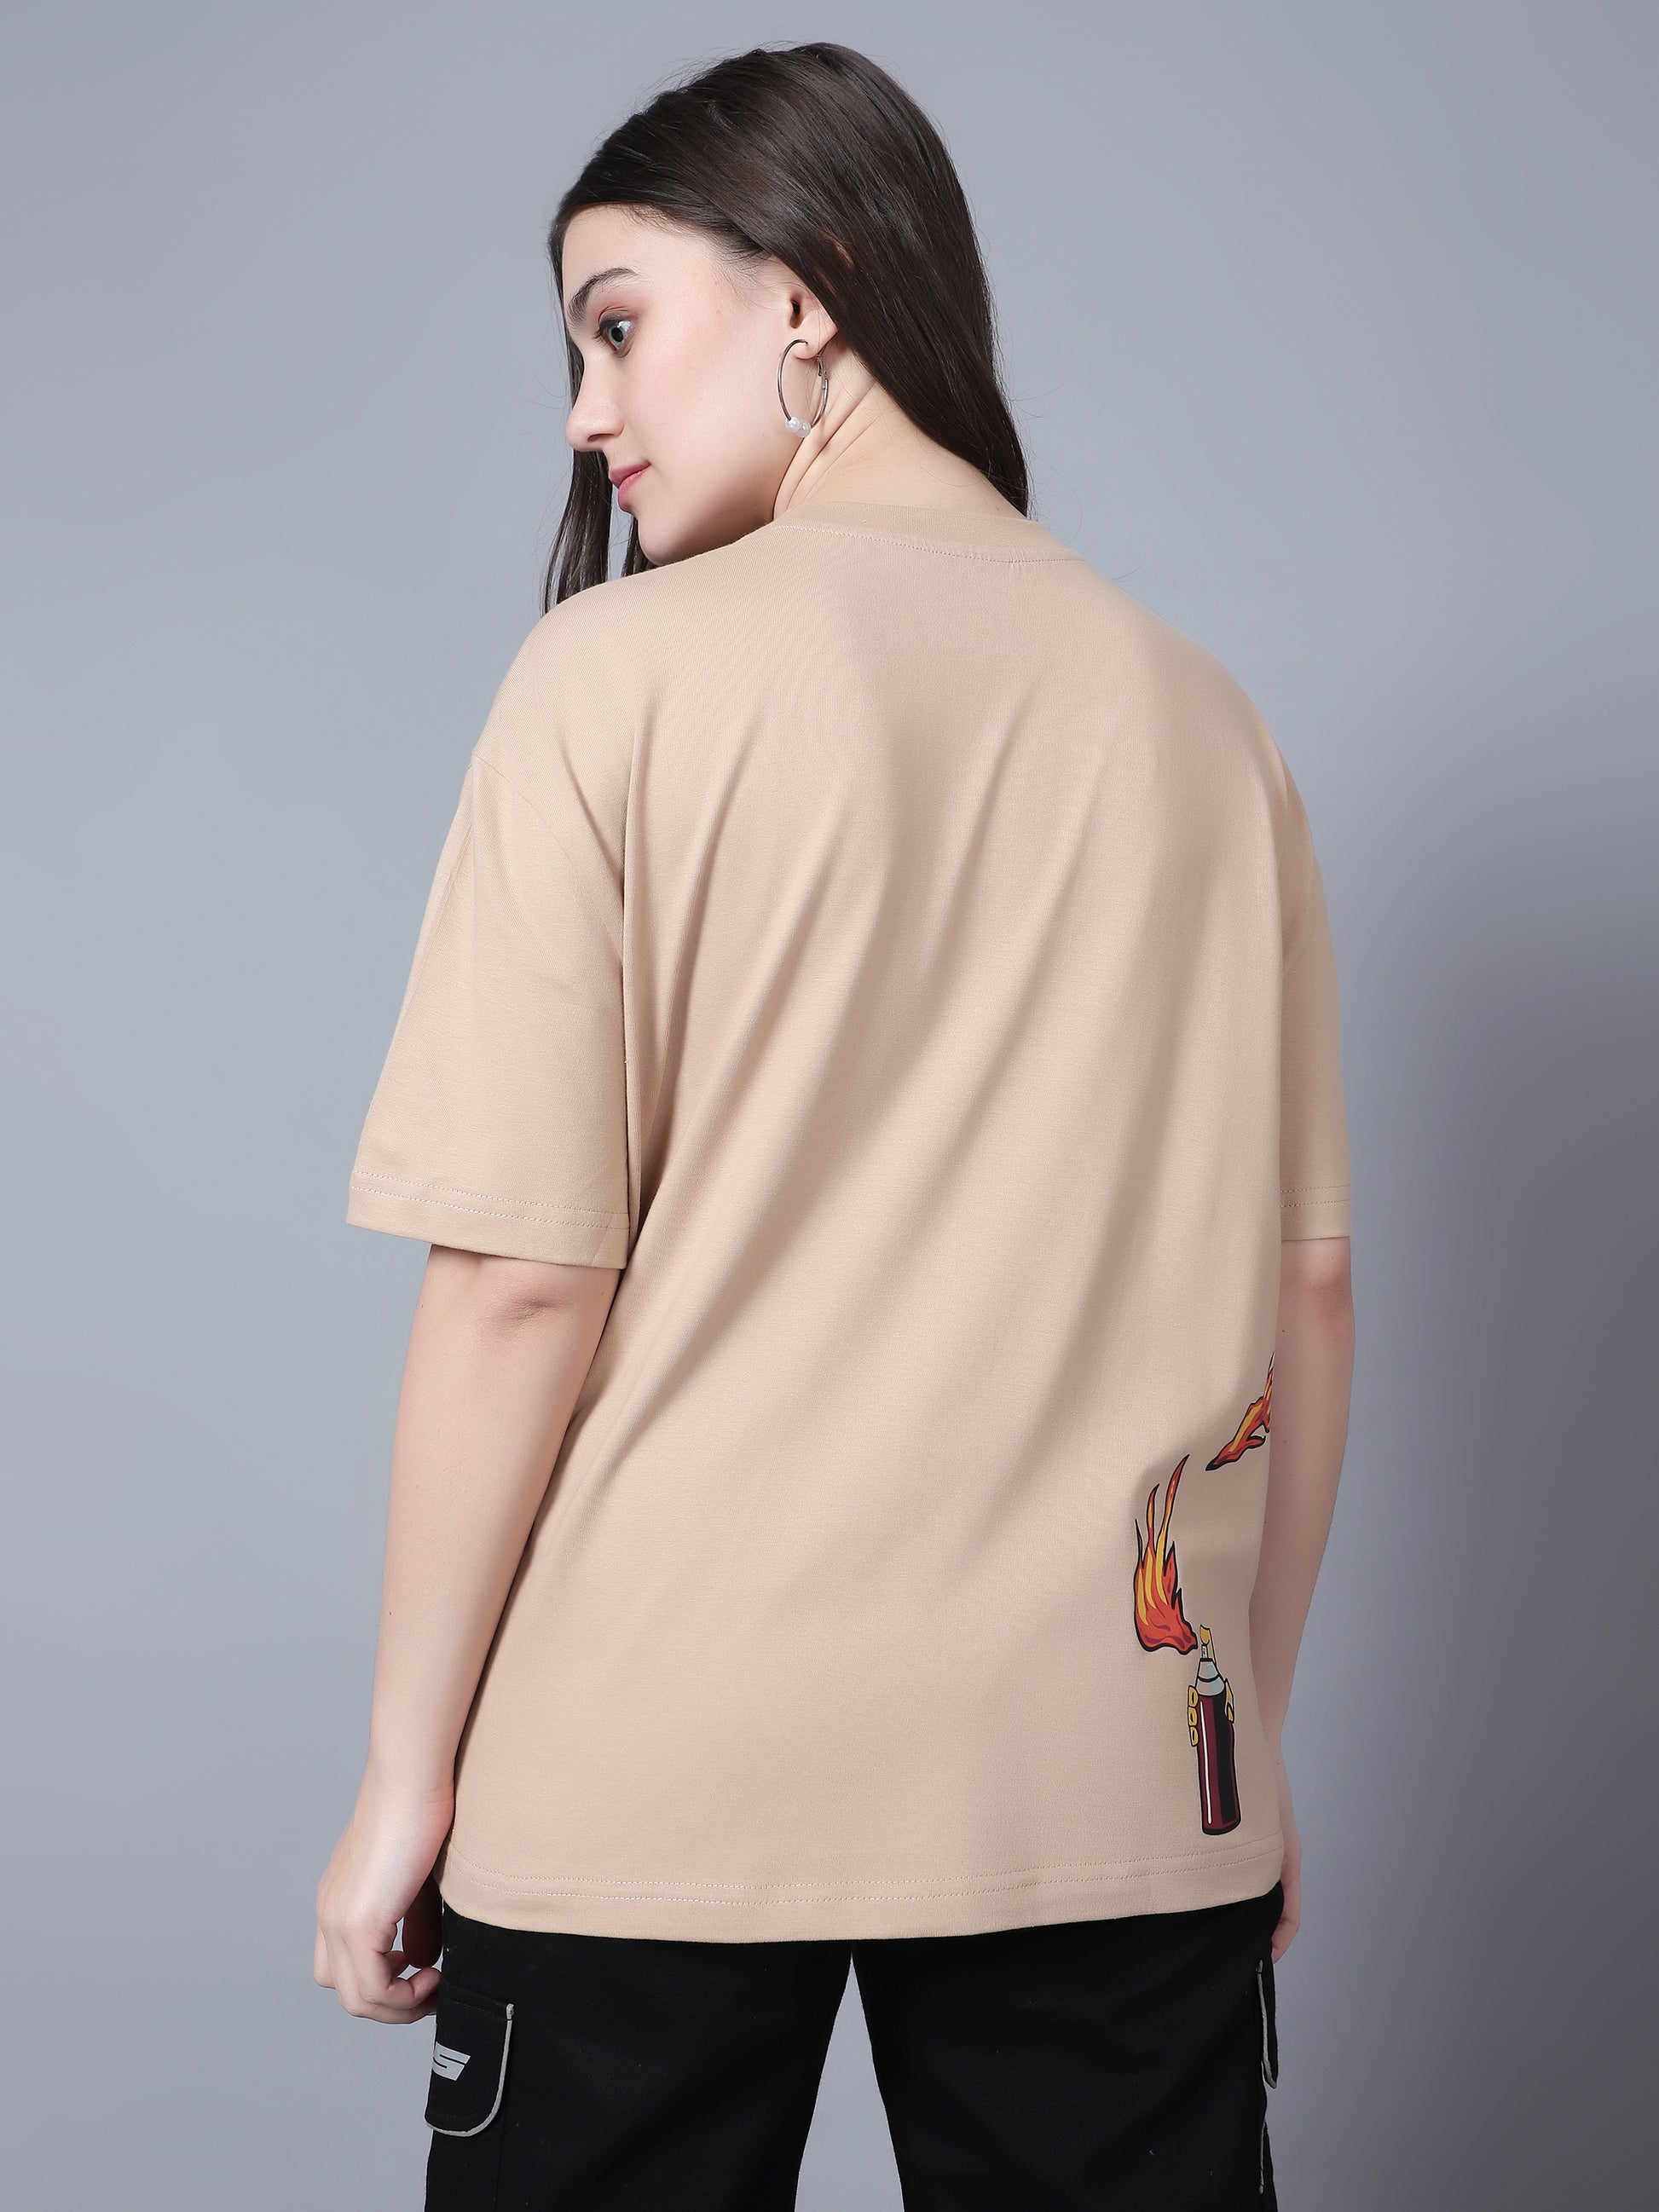 Fire Can Over-Sized T-Shirt (Nude) - Wearduds